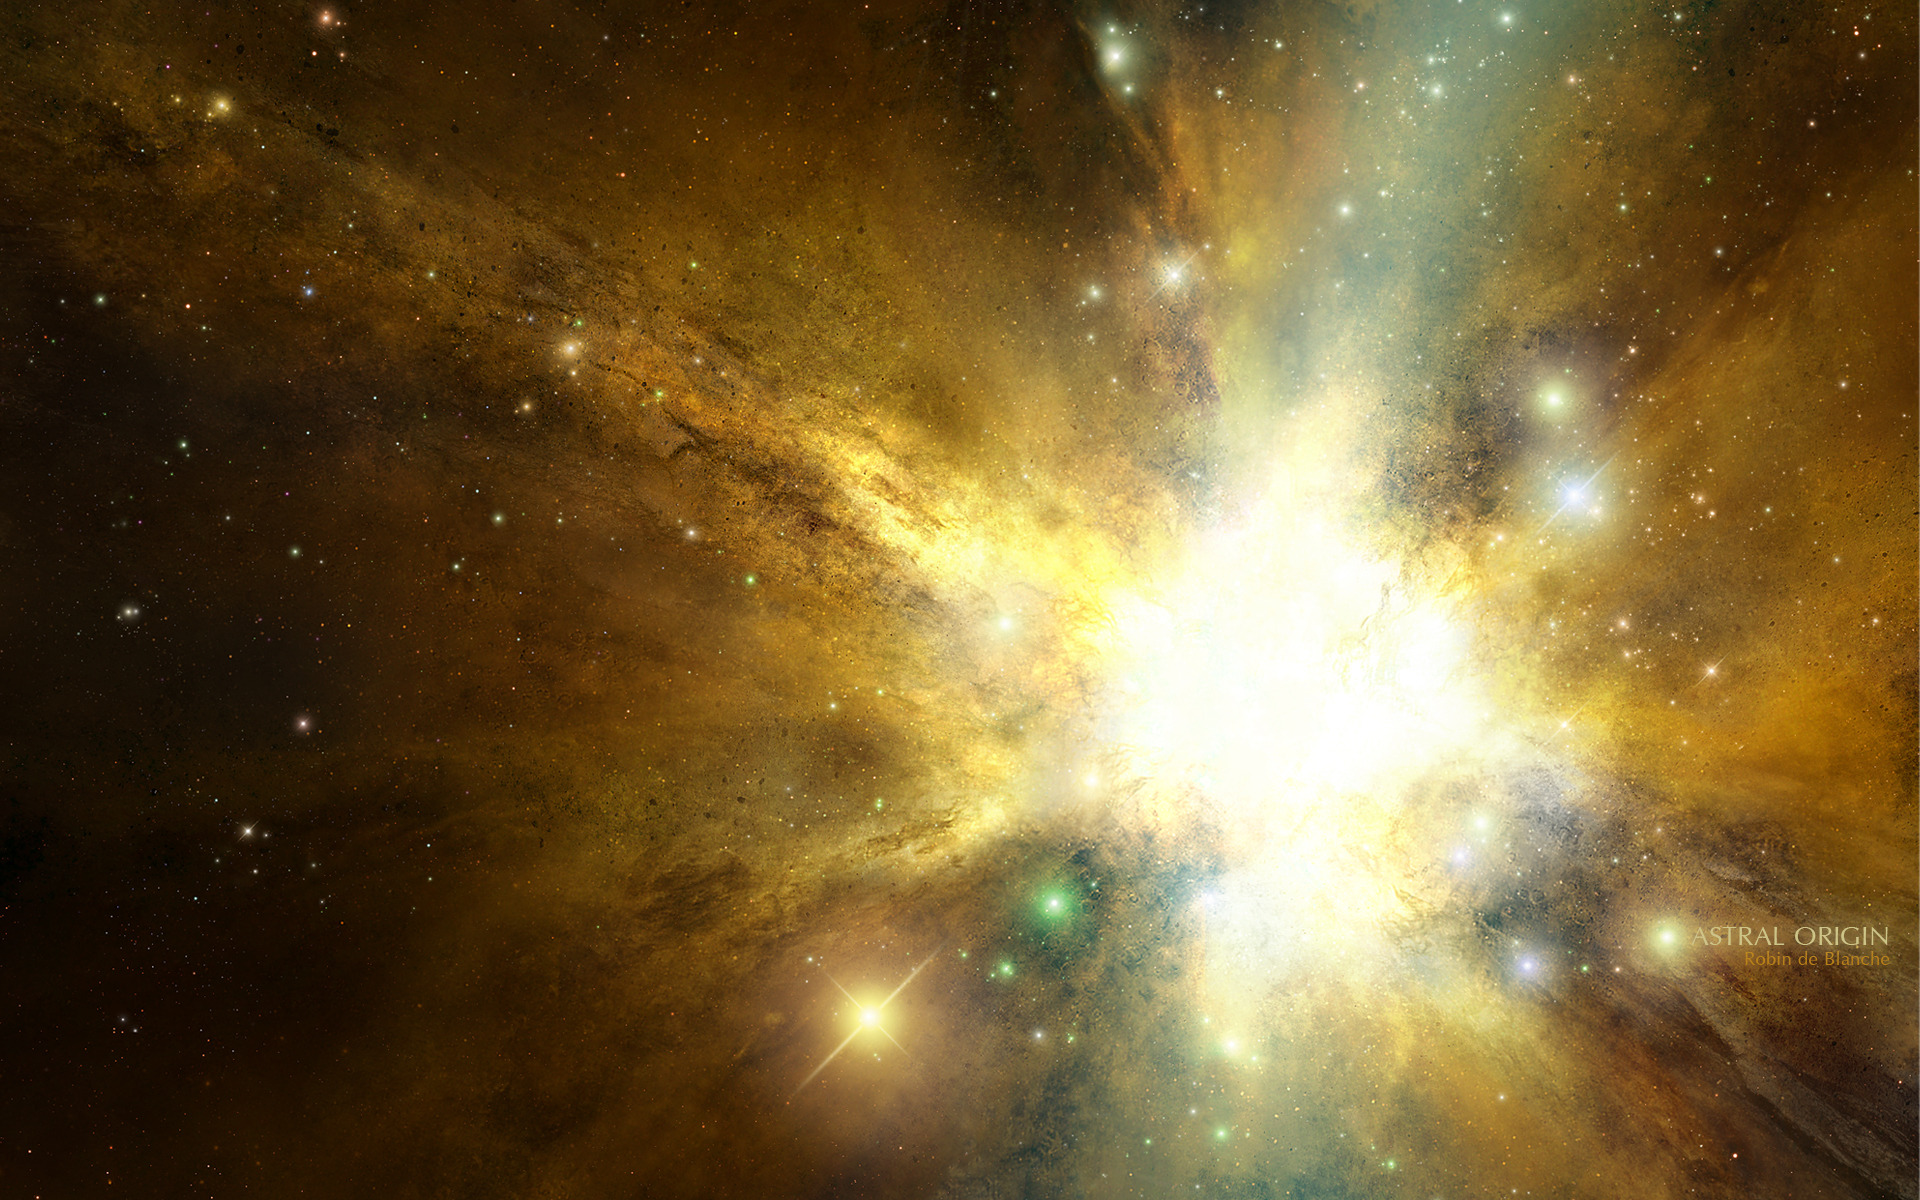 stars-airspace-endlessness-quadrivium-spacetravel-background-images-download-free-1920x1200.jpg